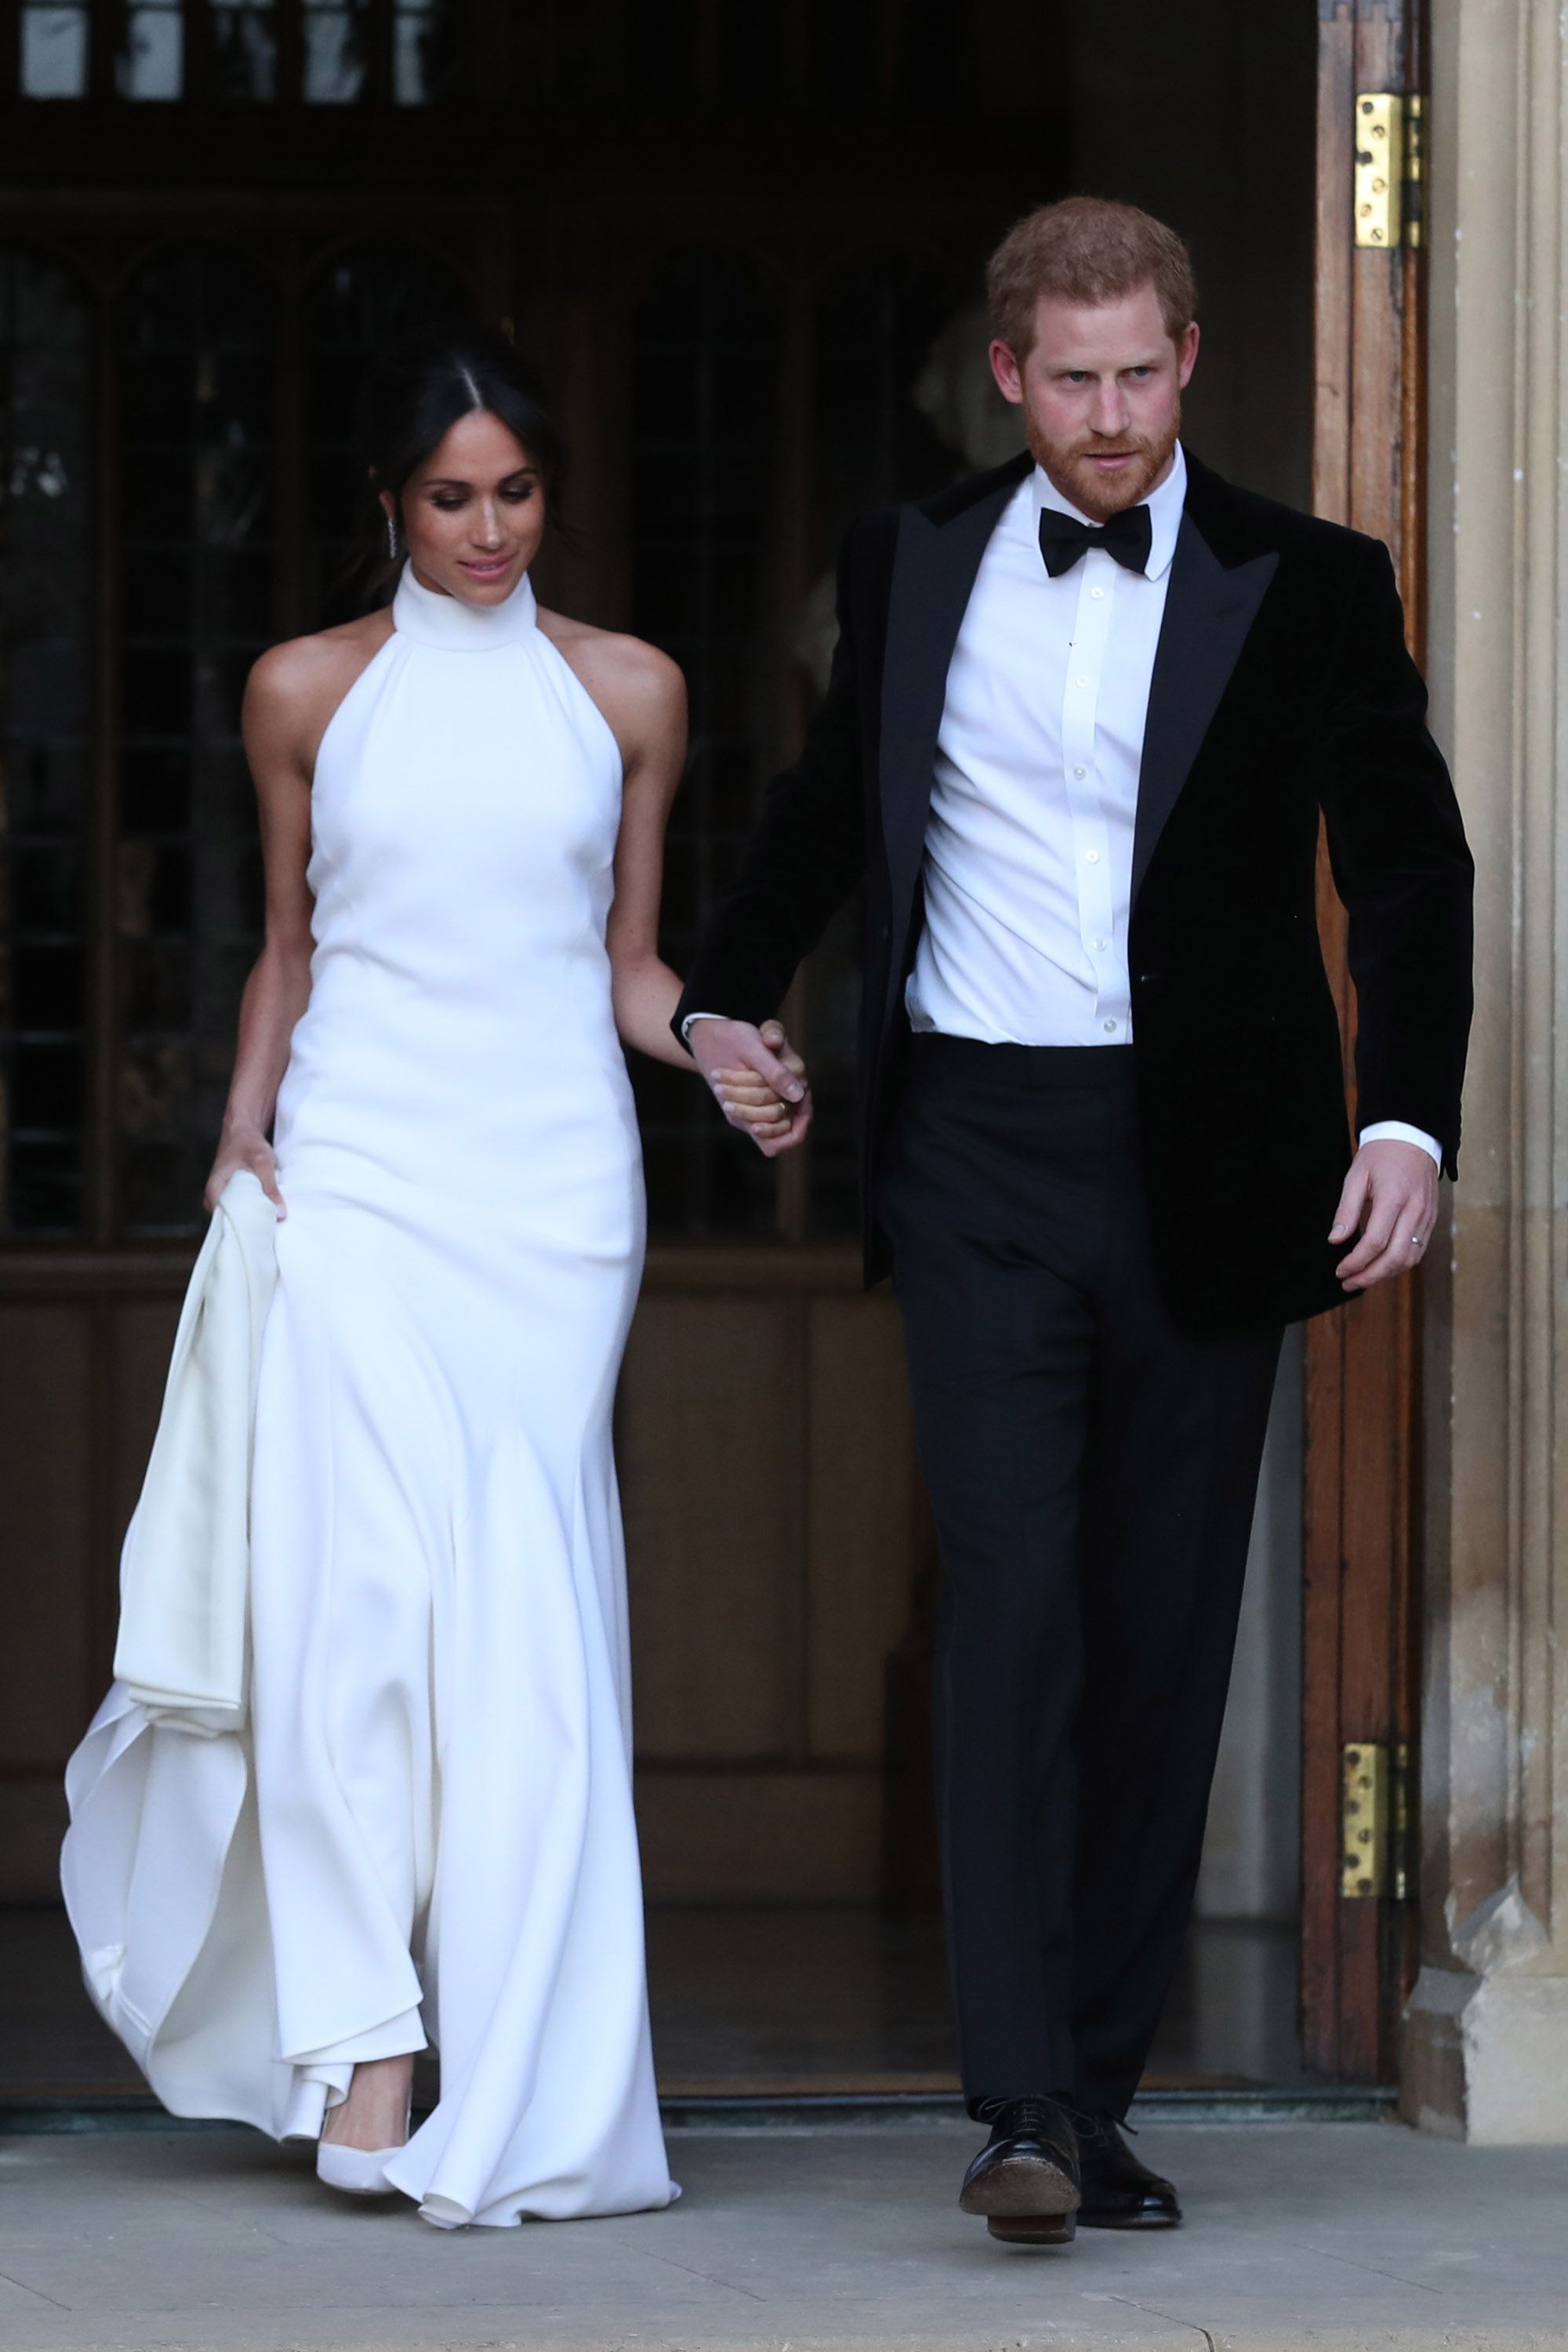 hbz meghan markle prince harry reception outfits gettyimages 960174034 1526935313